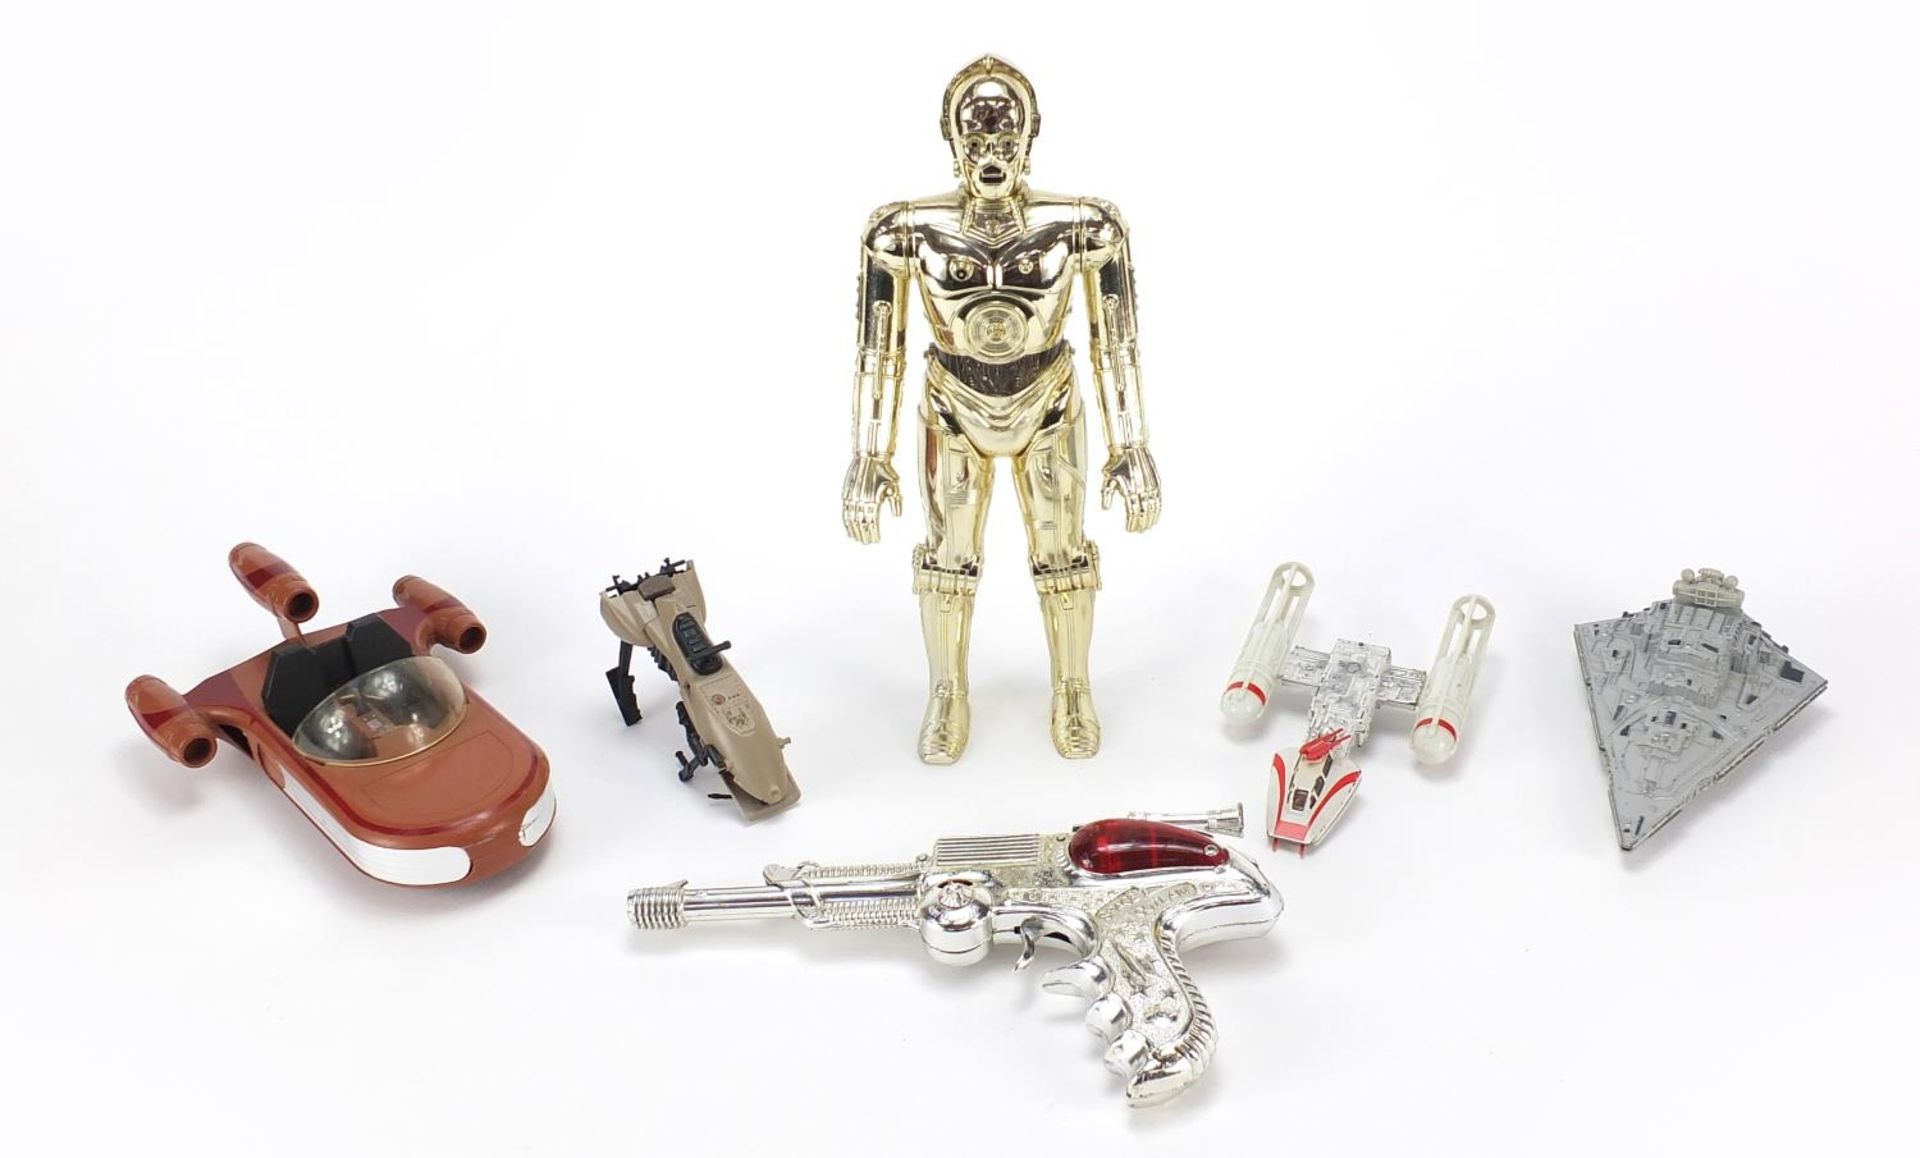 Vintage toys including Space Outlaw diecast gun and large Star Wars C-3PO